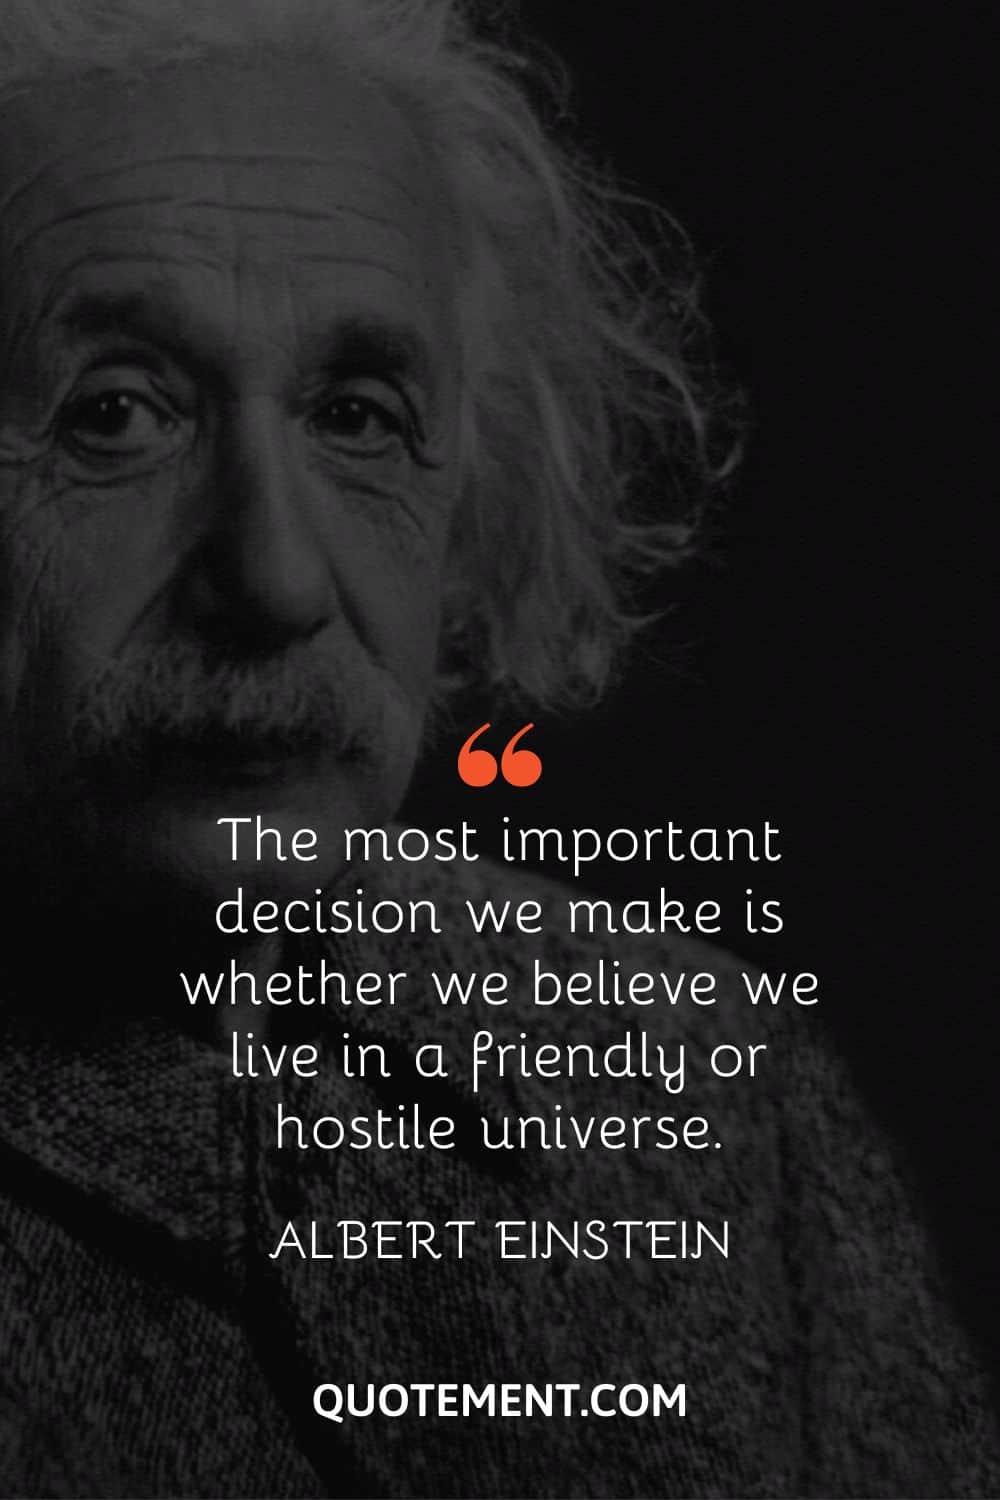 The most important decision we make is whether we believe we live in a friendly or hostile universe